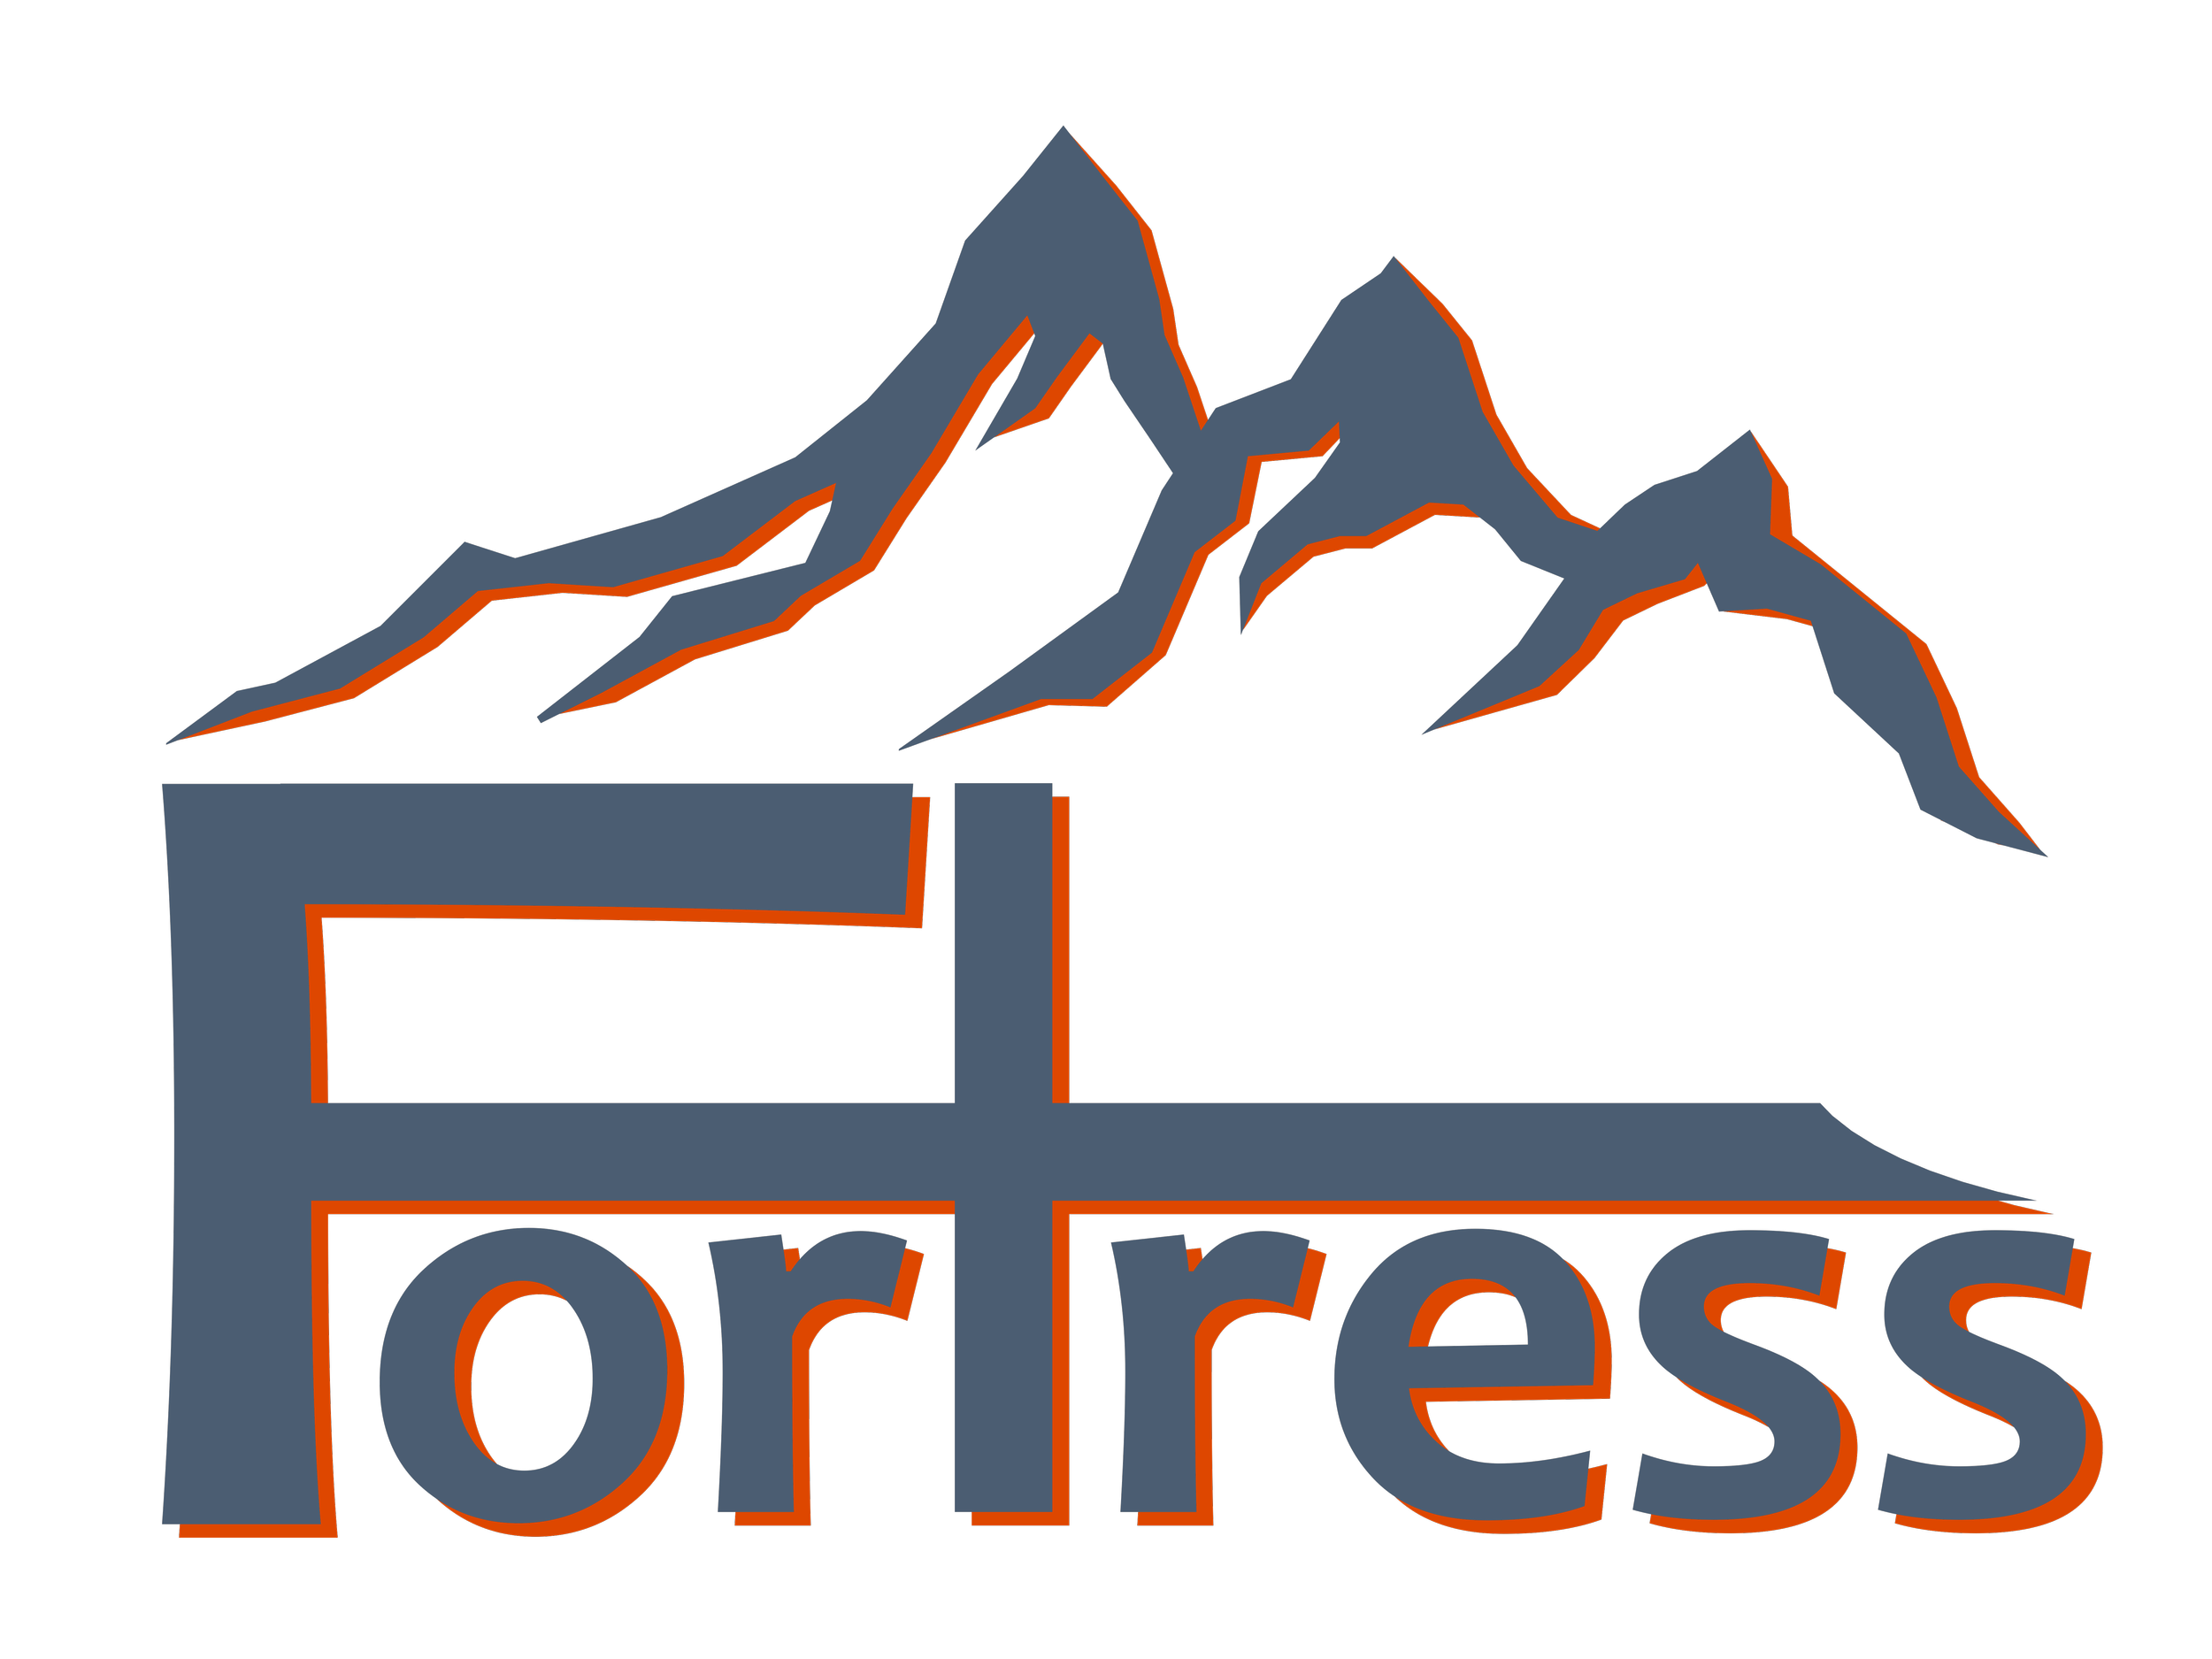  Brendon Warren &amp; Vance Kotal, owners of Fortress Inc., are the local construction team that is partnering with us to build hope for our neighbors in need. 